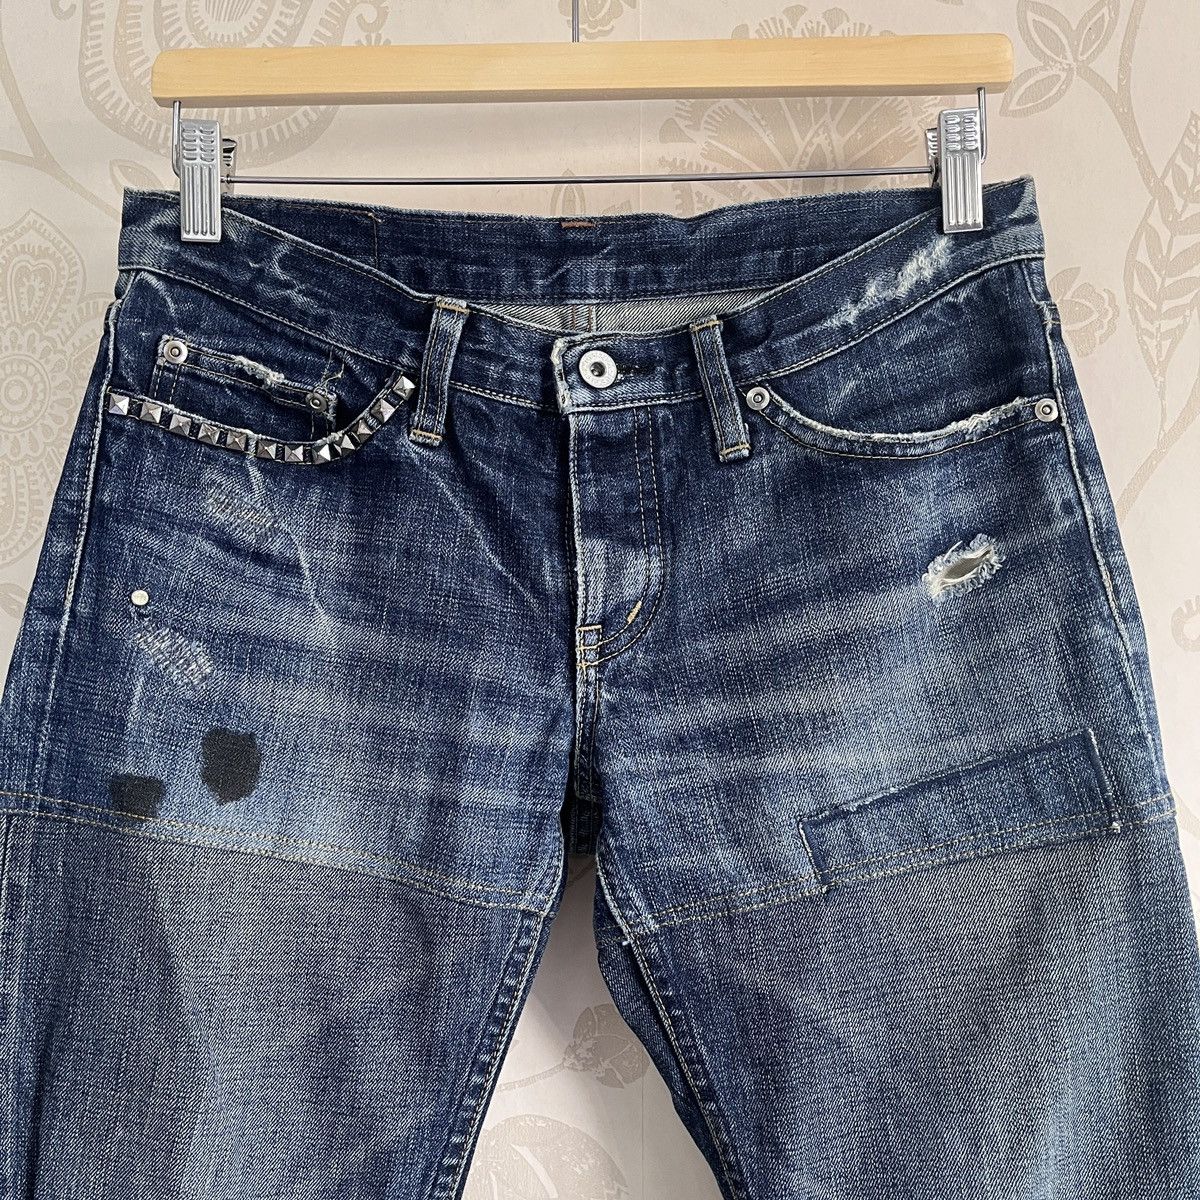 Archival Clothing - Vintage Hysteric Glamour Buttons Denim Jeans - 17